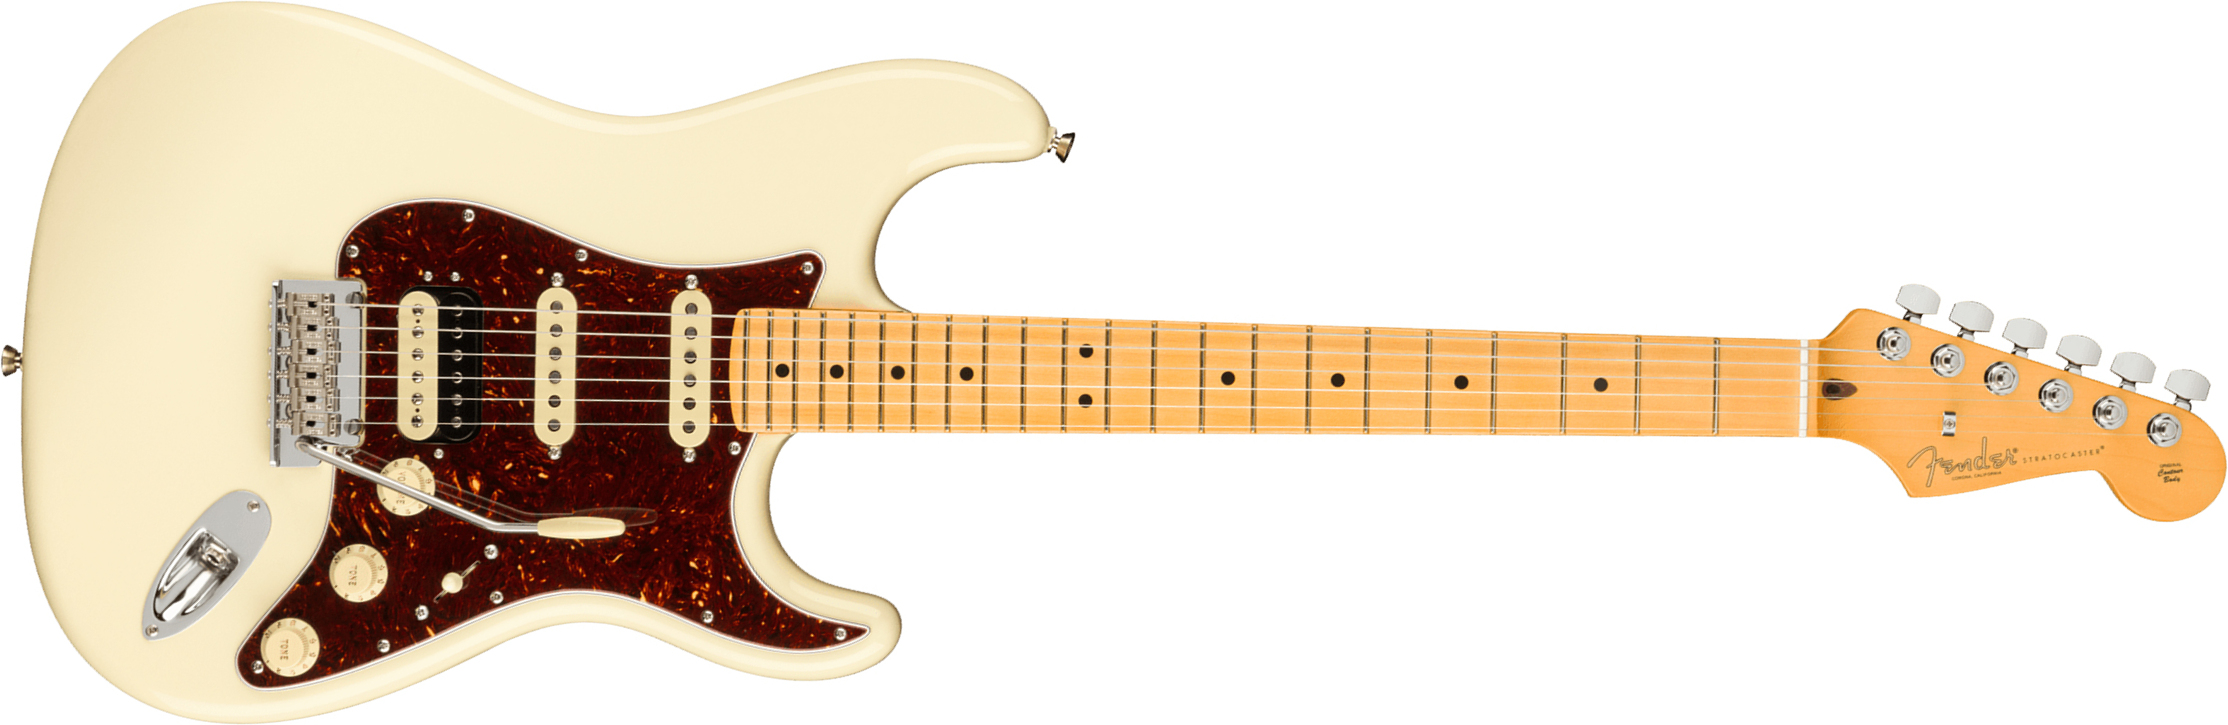 Fender Strat American Professional Ii Hss Usa Mn - Olympic White - Guitare Électrique Forme Str - Main picture